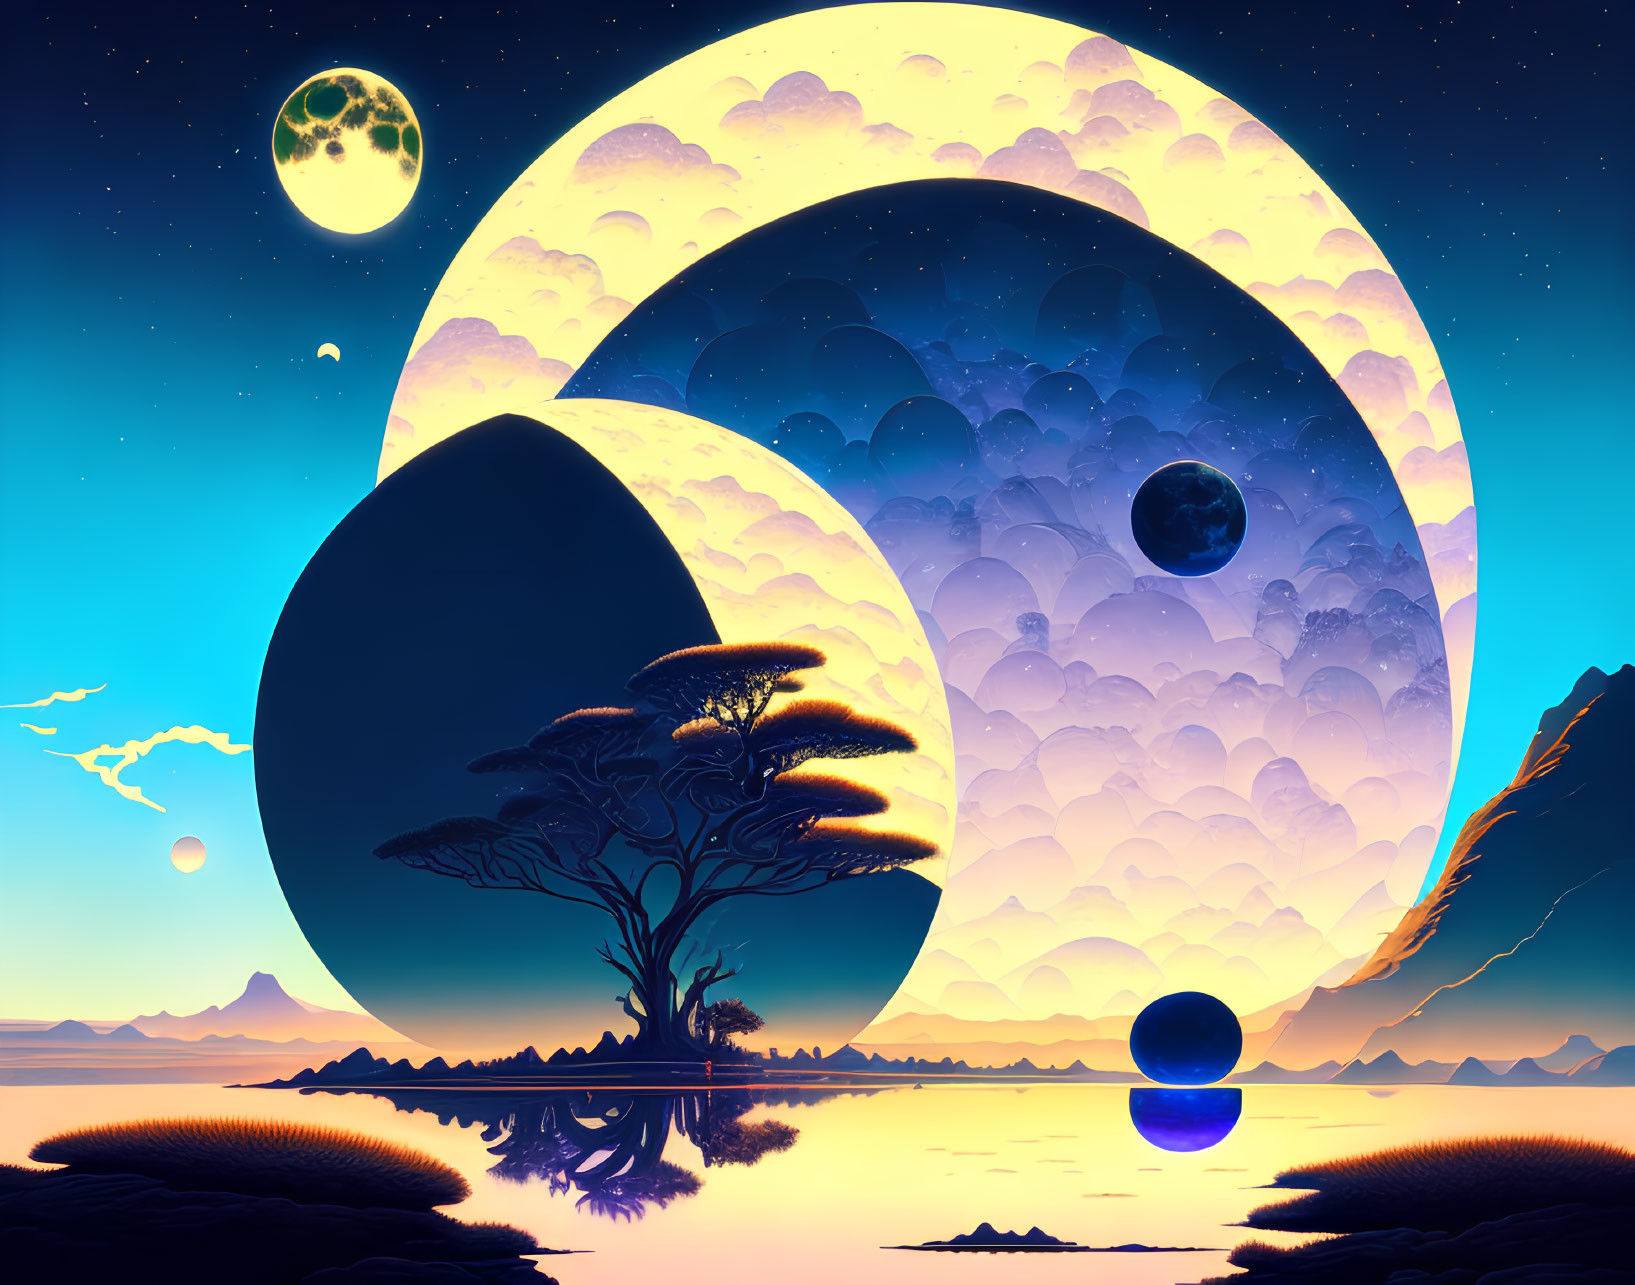 Surreal landscape with lone tree, celestial bodies, and twilight sky